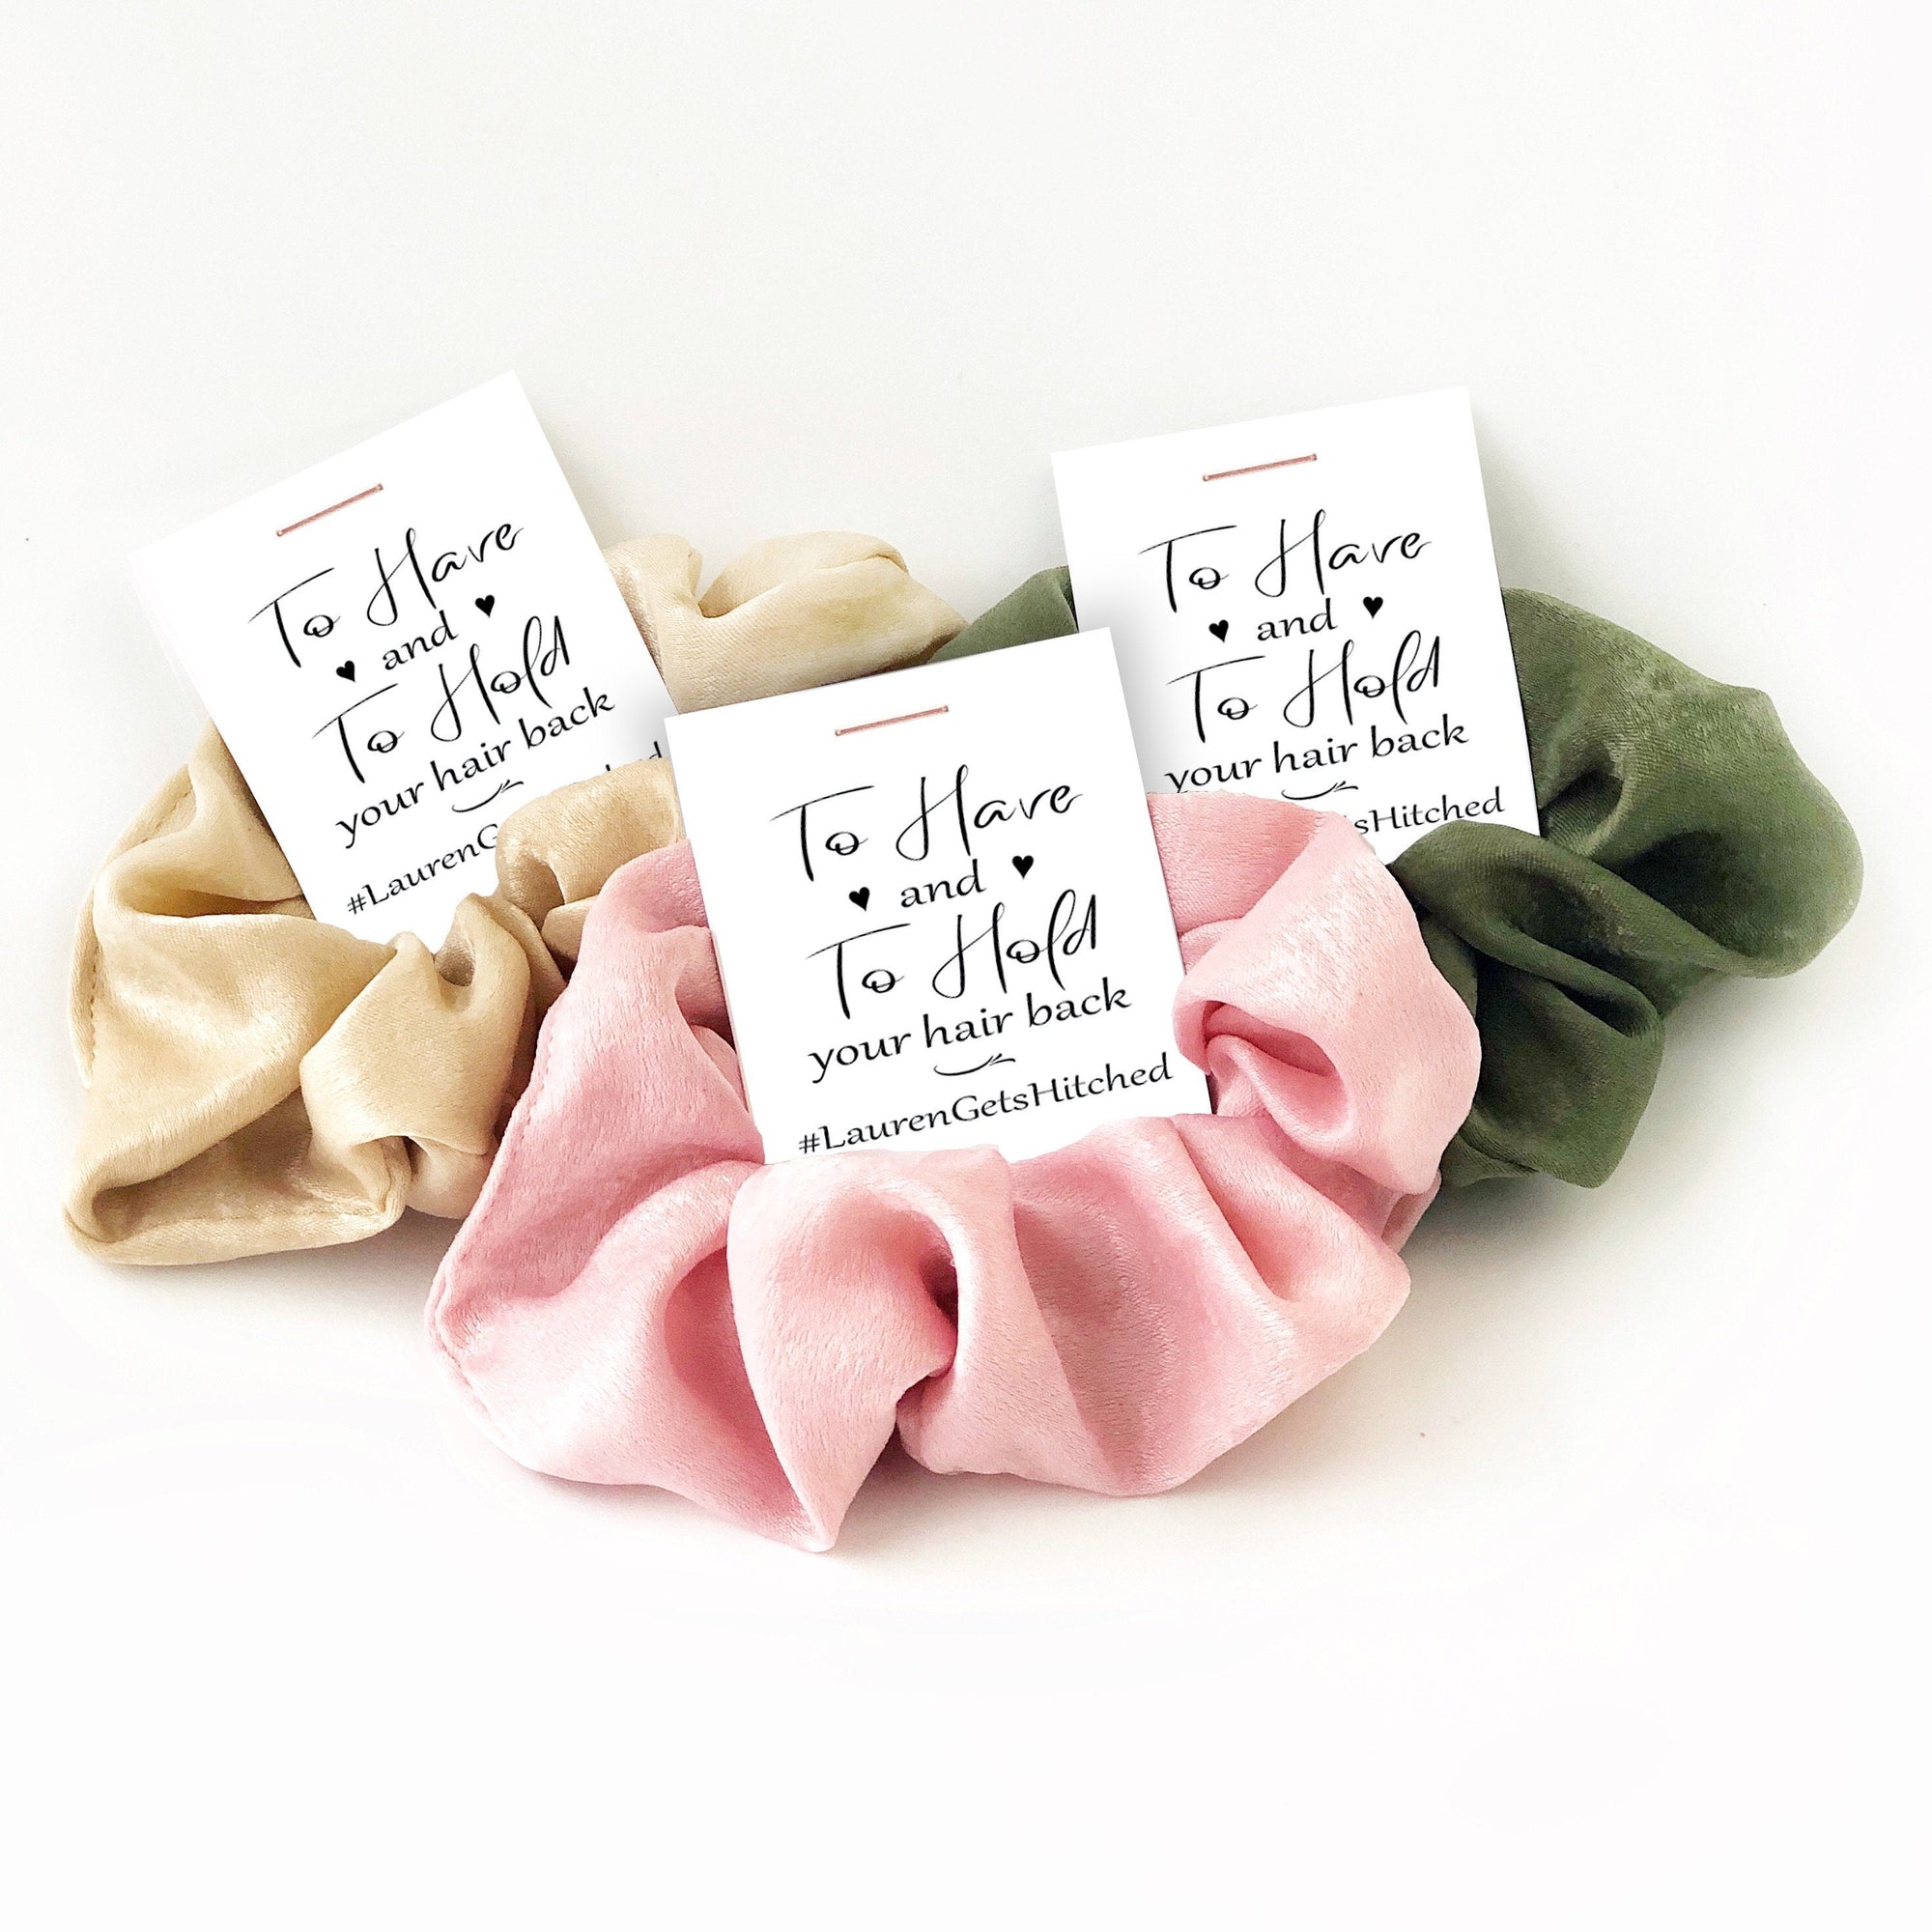 To Have and To Hold Your Hair Back Bachelorette Party Favors, Hashtag Scrunchie Favors, Scrunchie Bridal Shower Favors, Hair Tie Favors - @PlumPolkaDot 